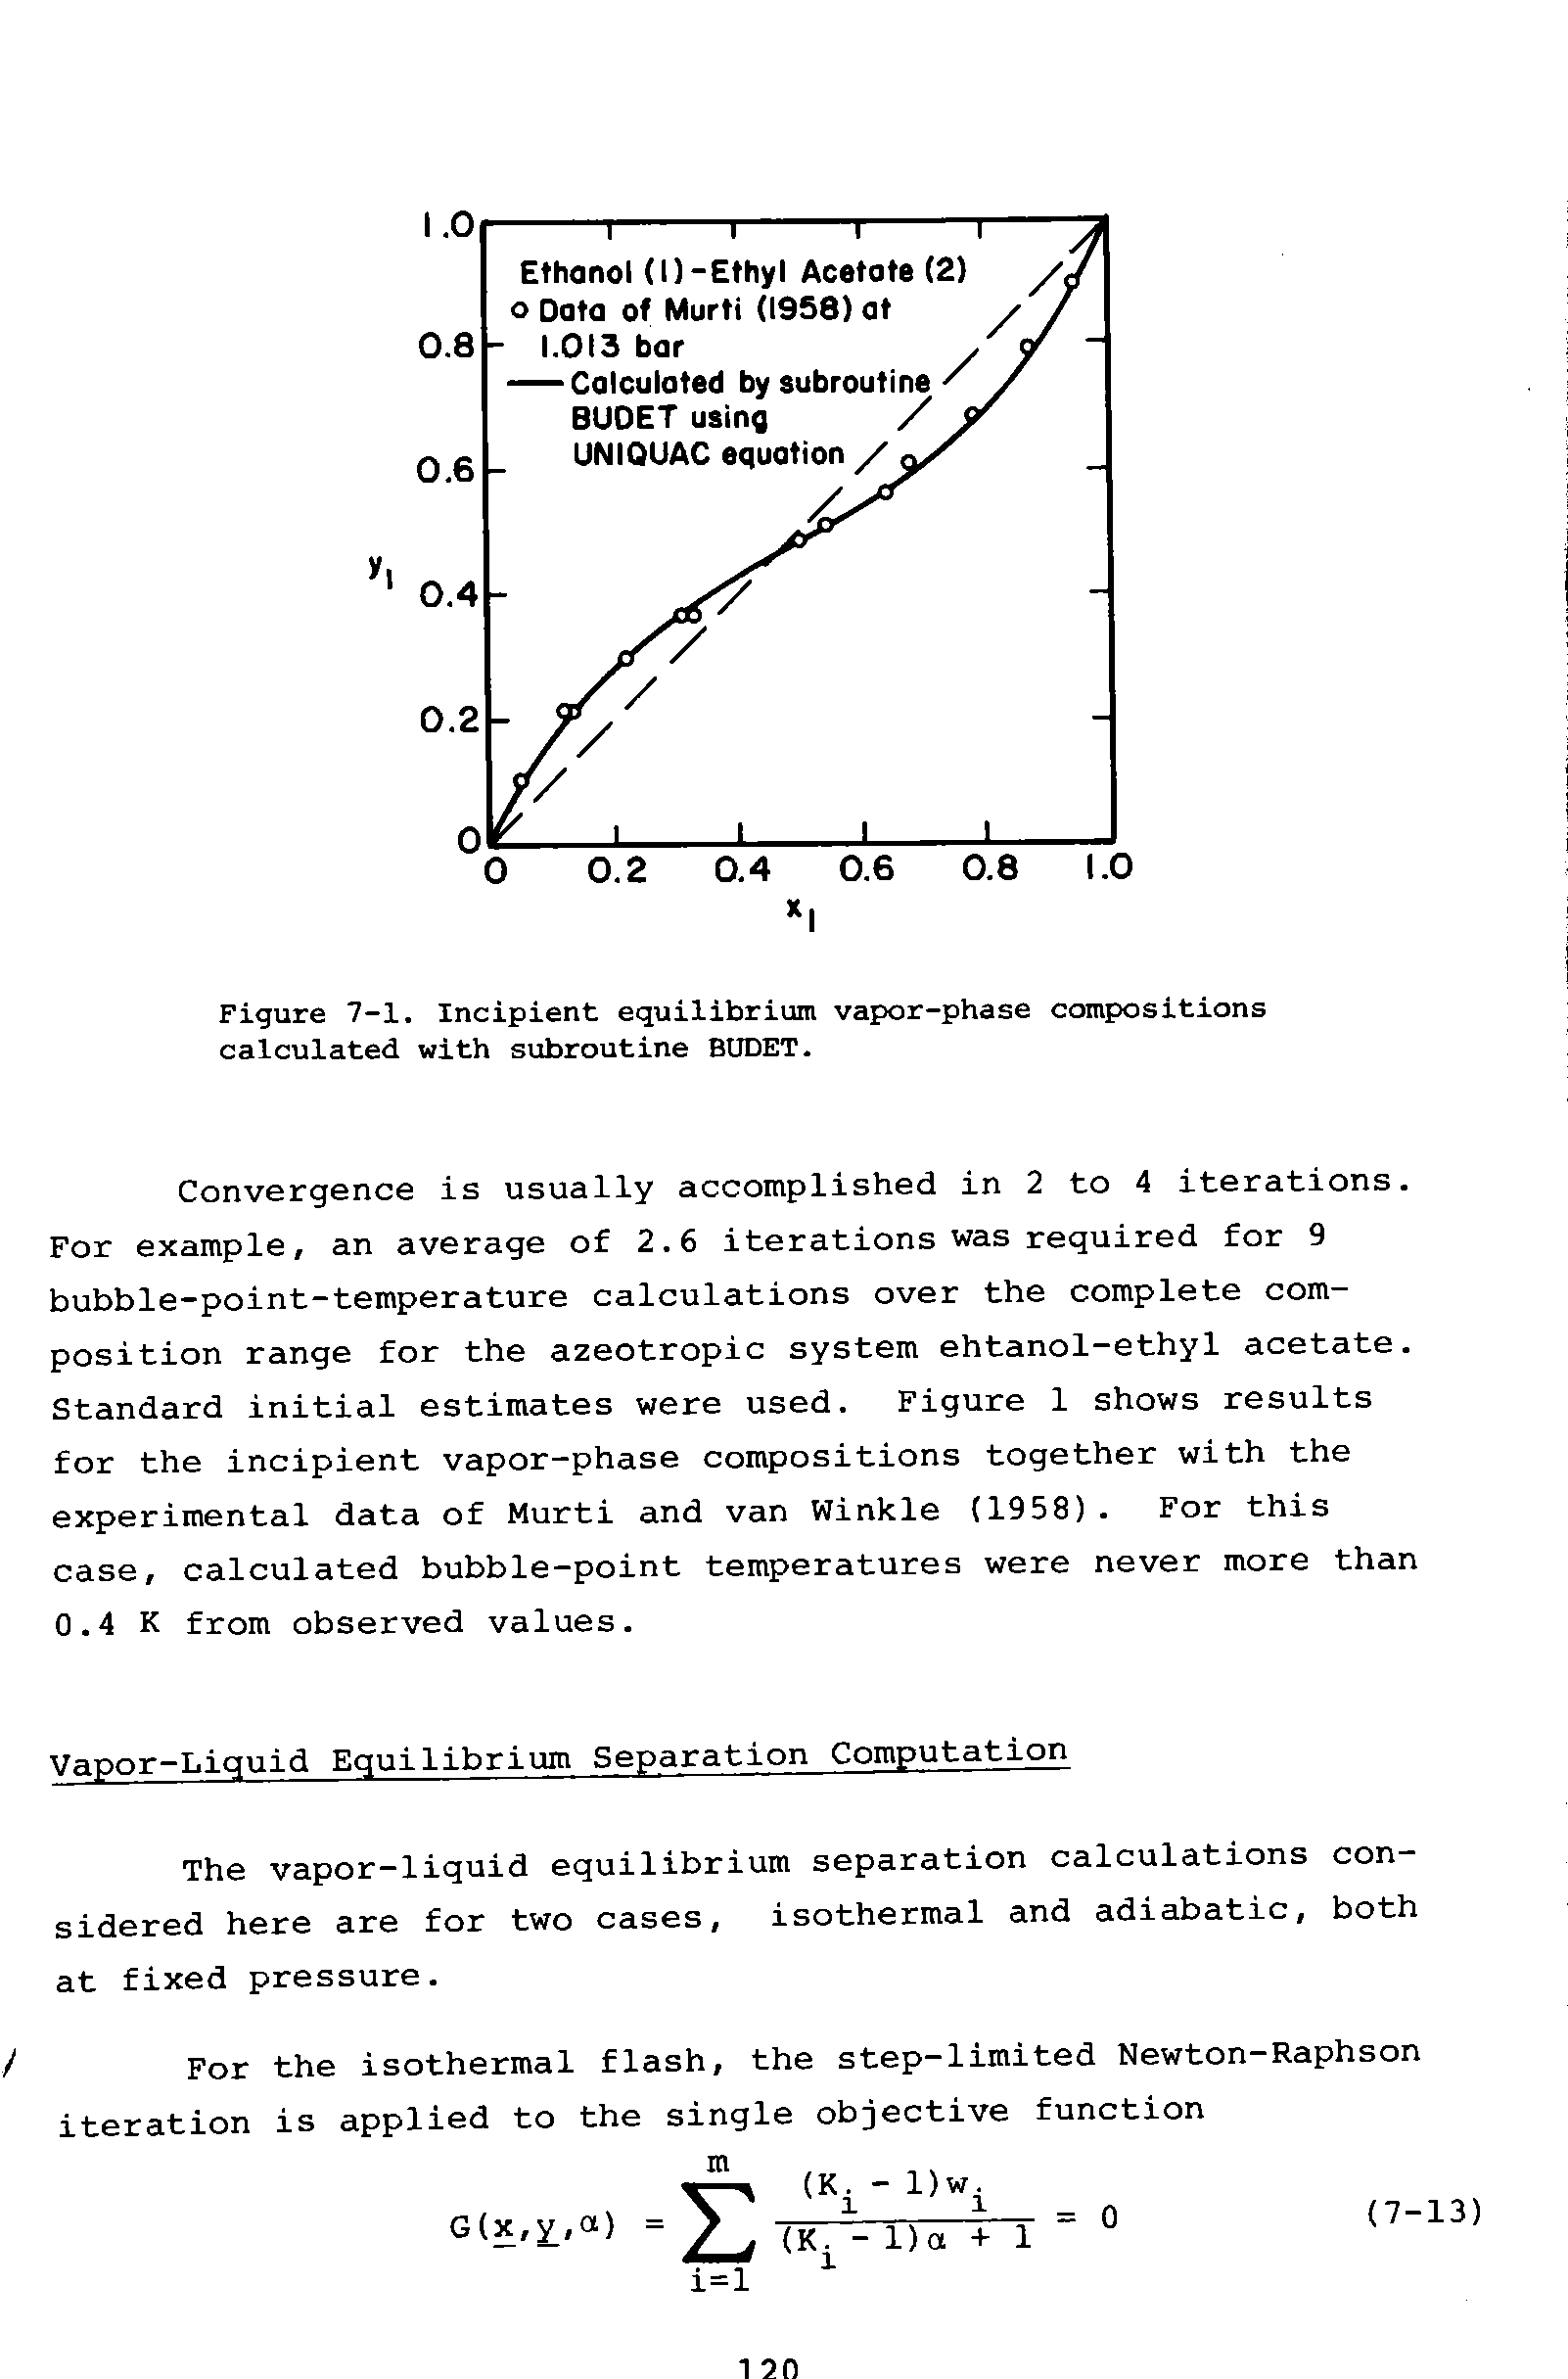 Figure 7-1. Incipient equilibrium vapor-phase compositions calculated with subroutine BUDET.